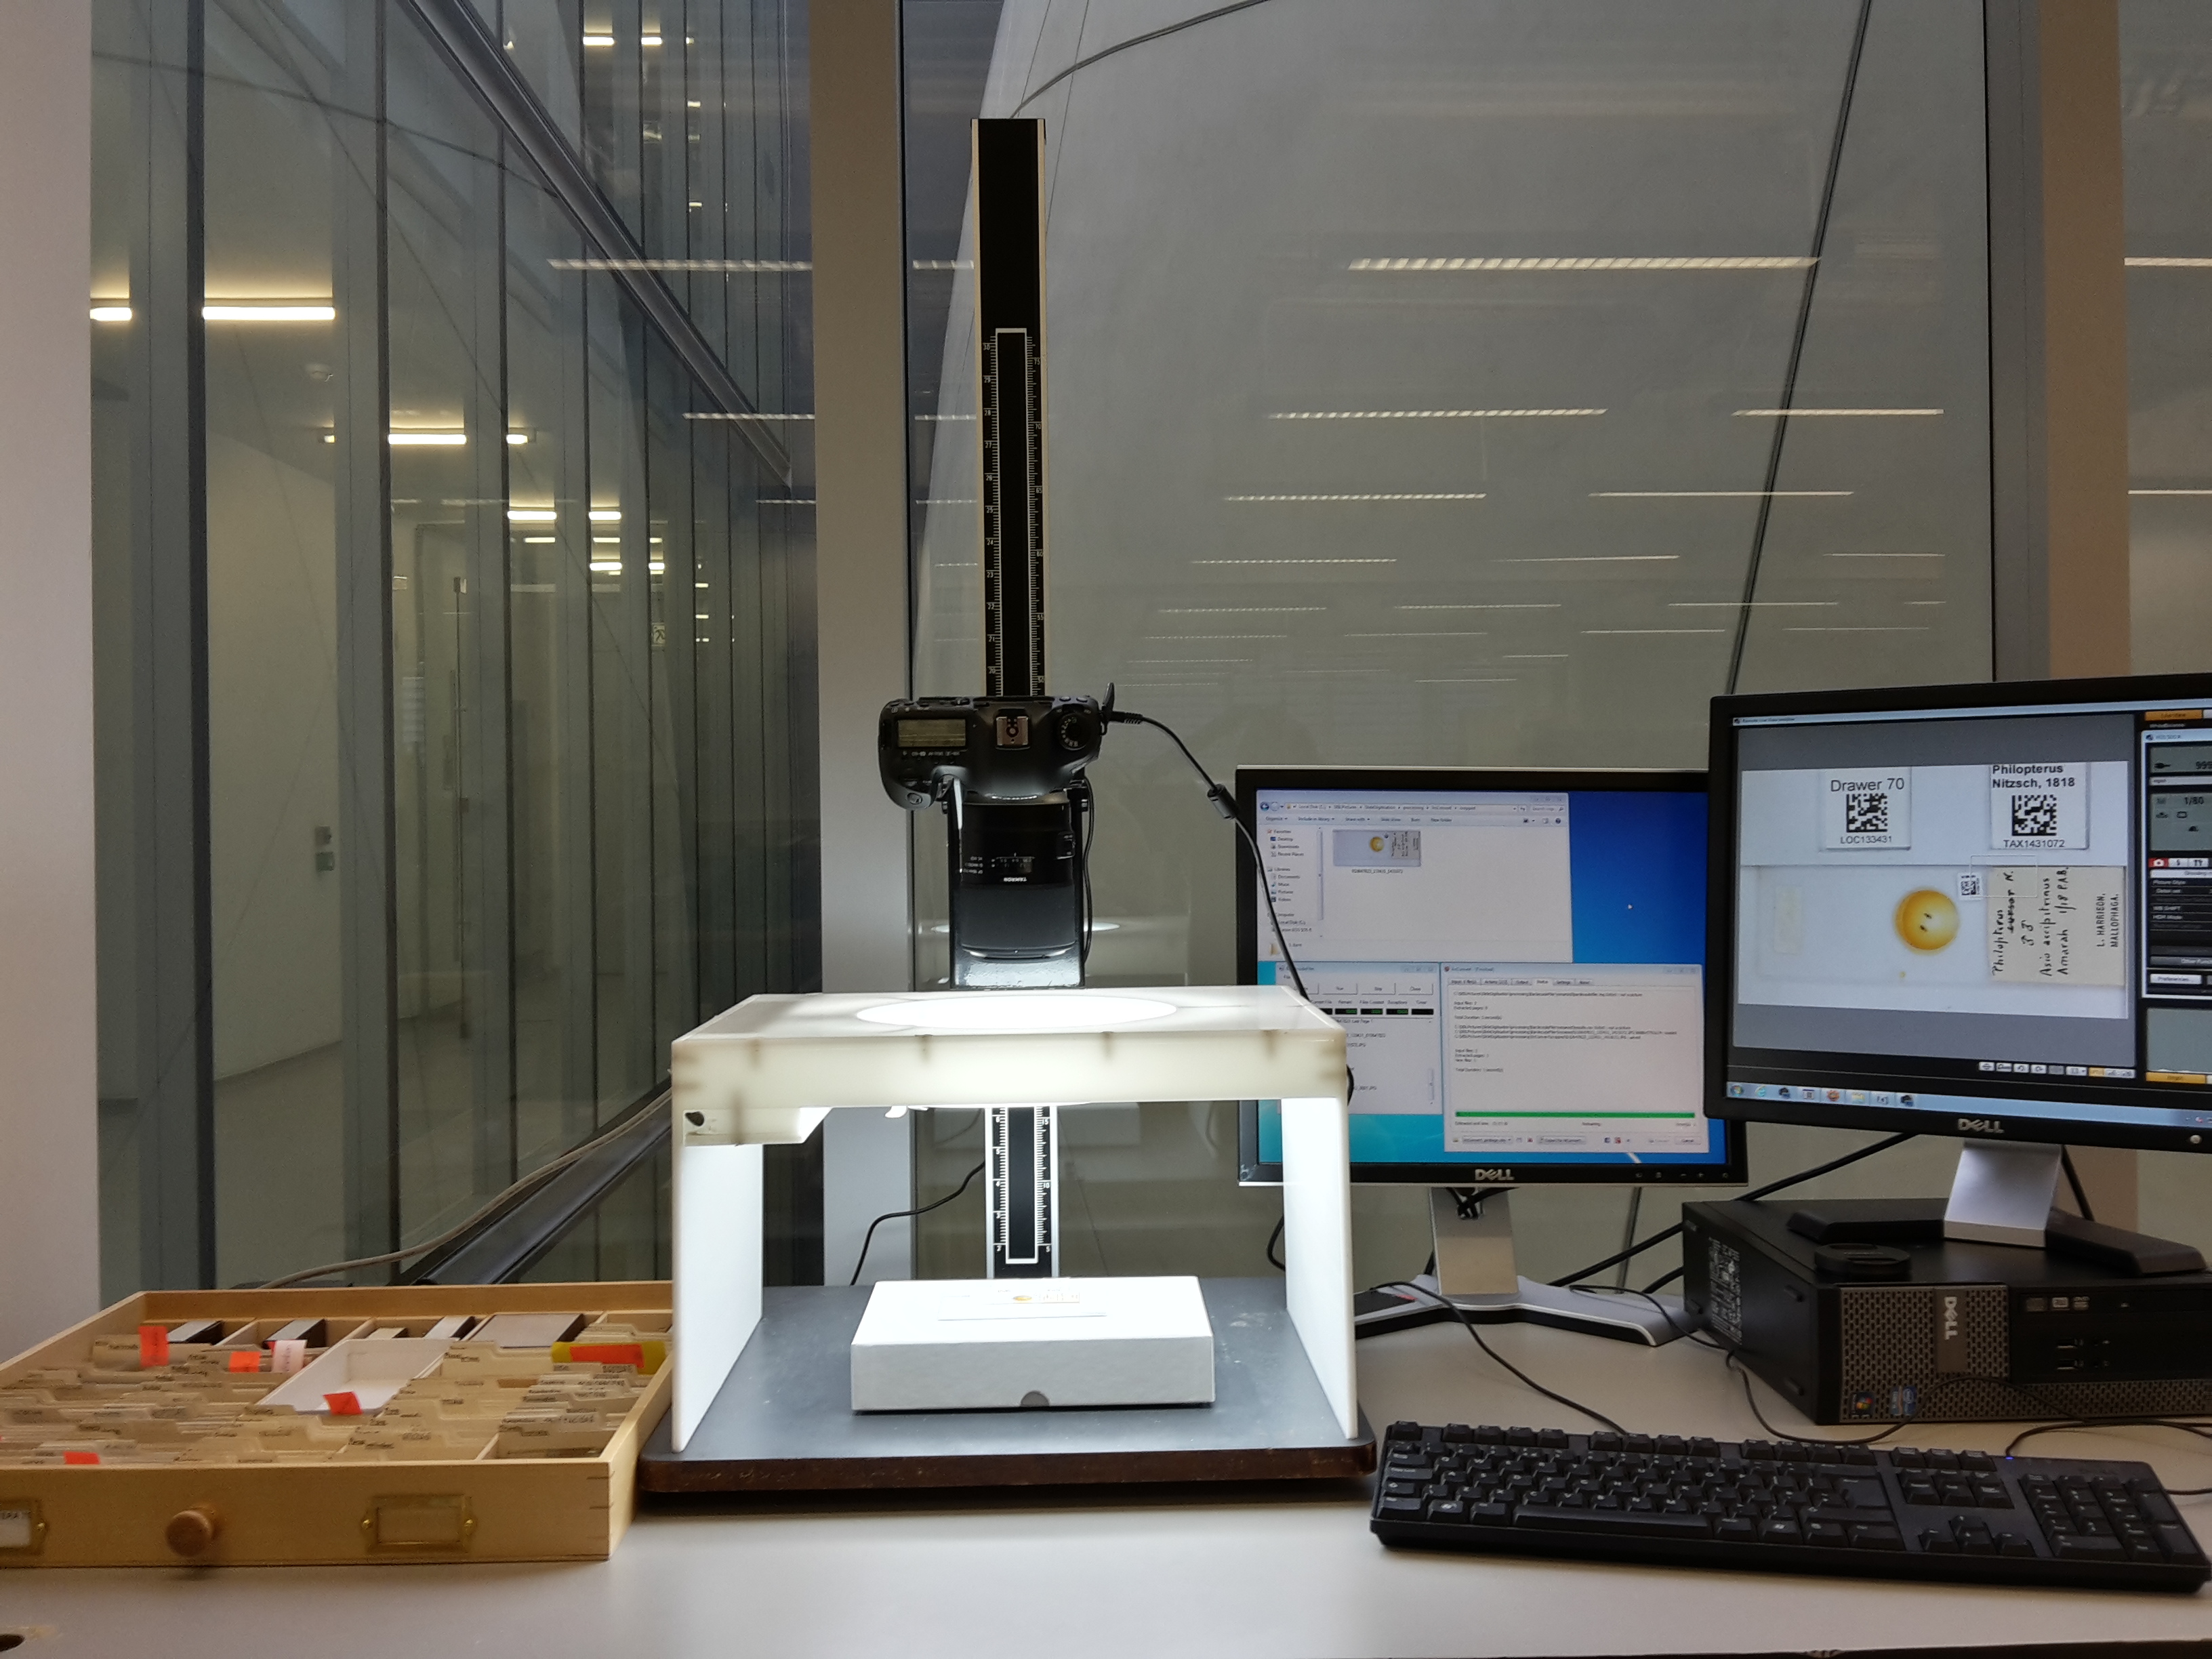 a picture of a digitisation station. On the lefthand side, there is a drawer of microscope slides. In the middle, there is a digitisation station, with a camera held on a copy stand above a lightbox. On the righthand side are two monitors, one which shows the picture that will be captured by the camera: in this case a microscope slide.